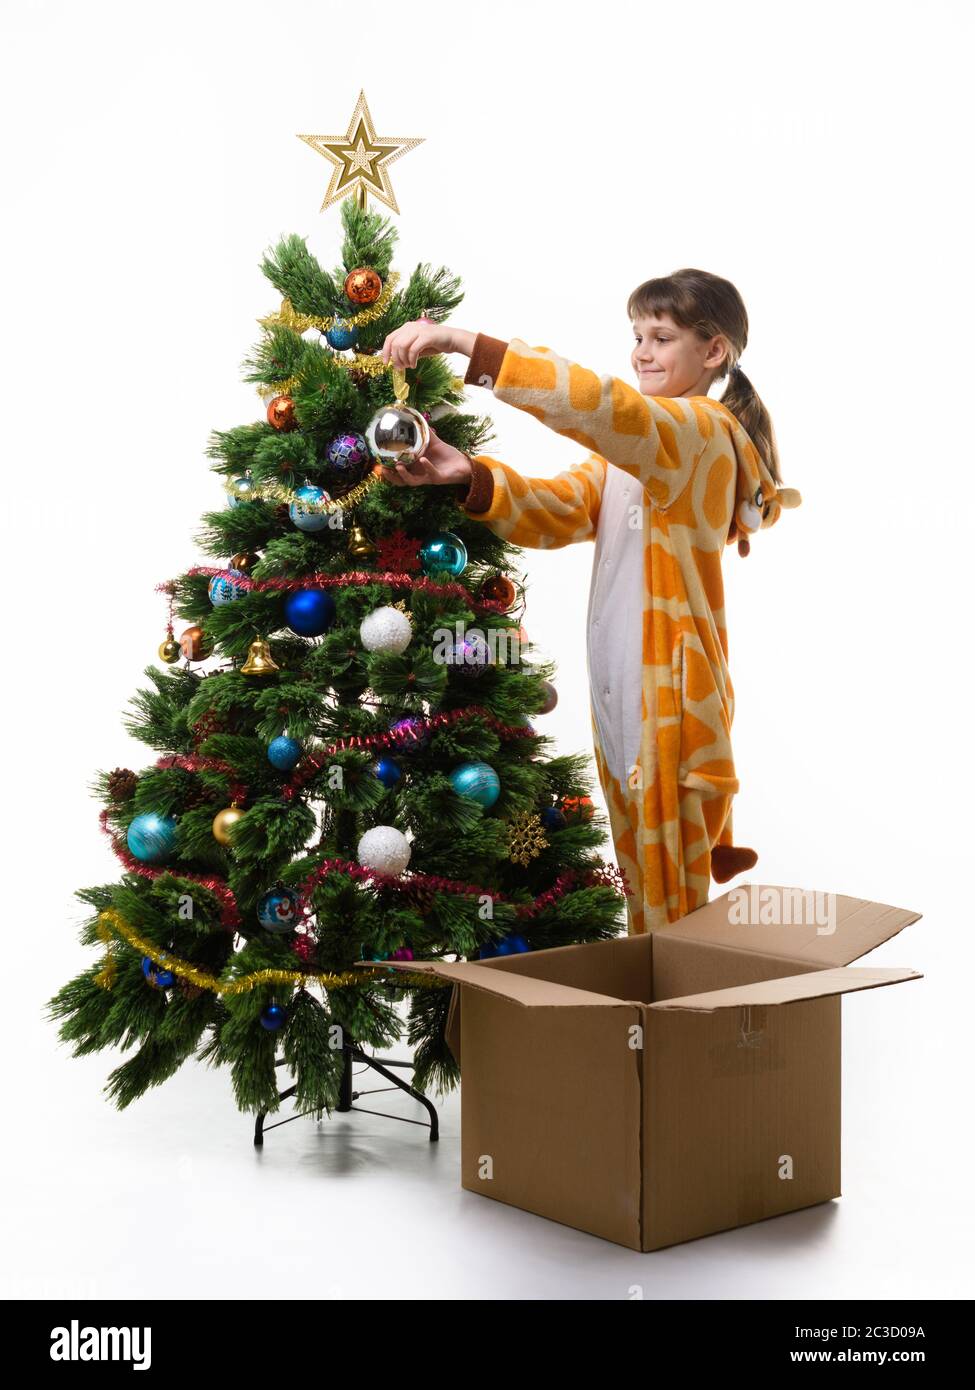 Nine-year-old girl with a smile dresses up The Christmas tree Stock Photo